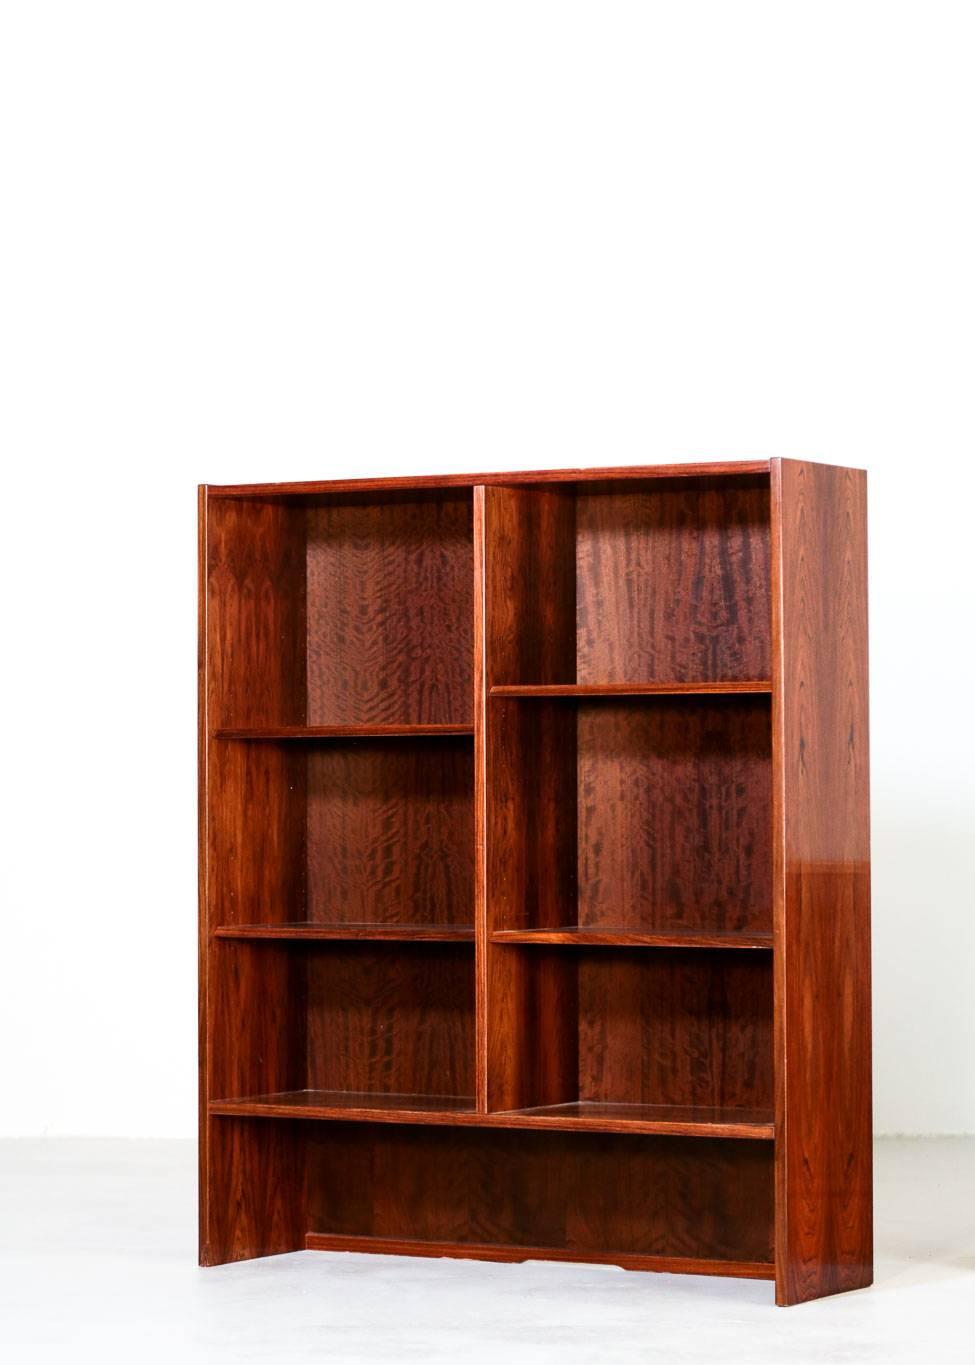 Rosewood Danish Bookcases by Poul Hundevad, 1970s Scandinavian 4